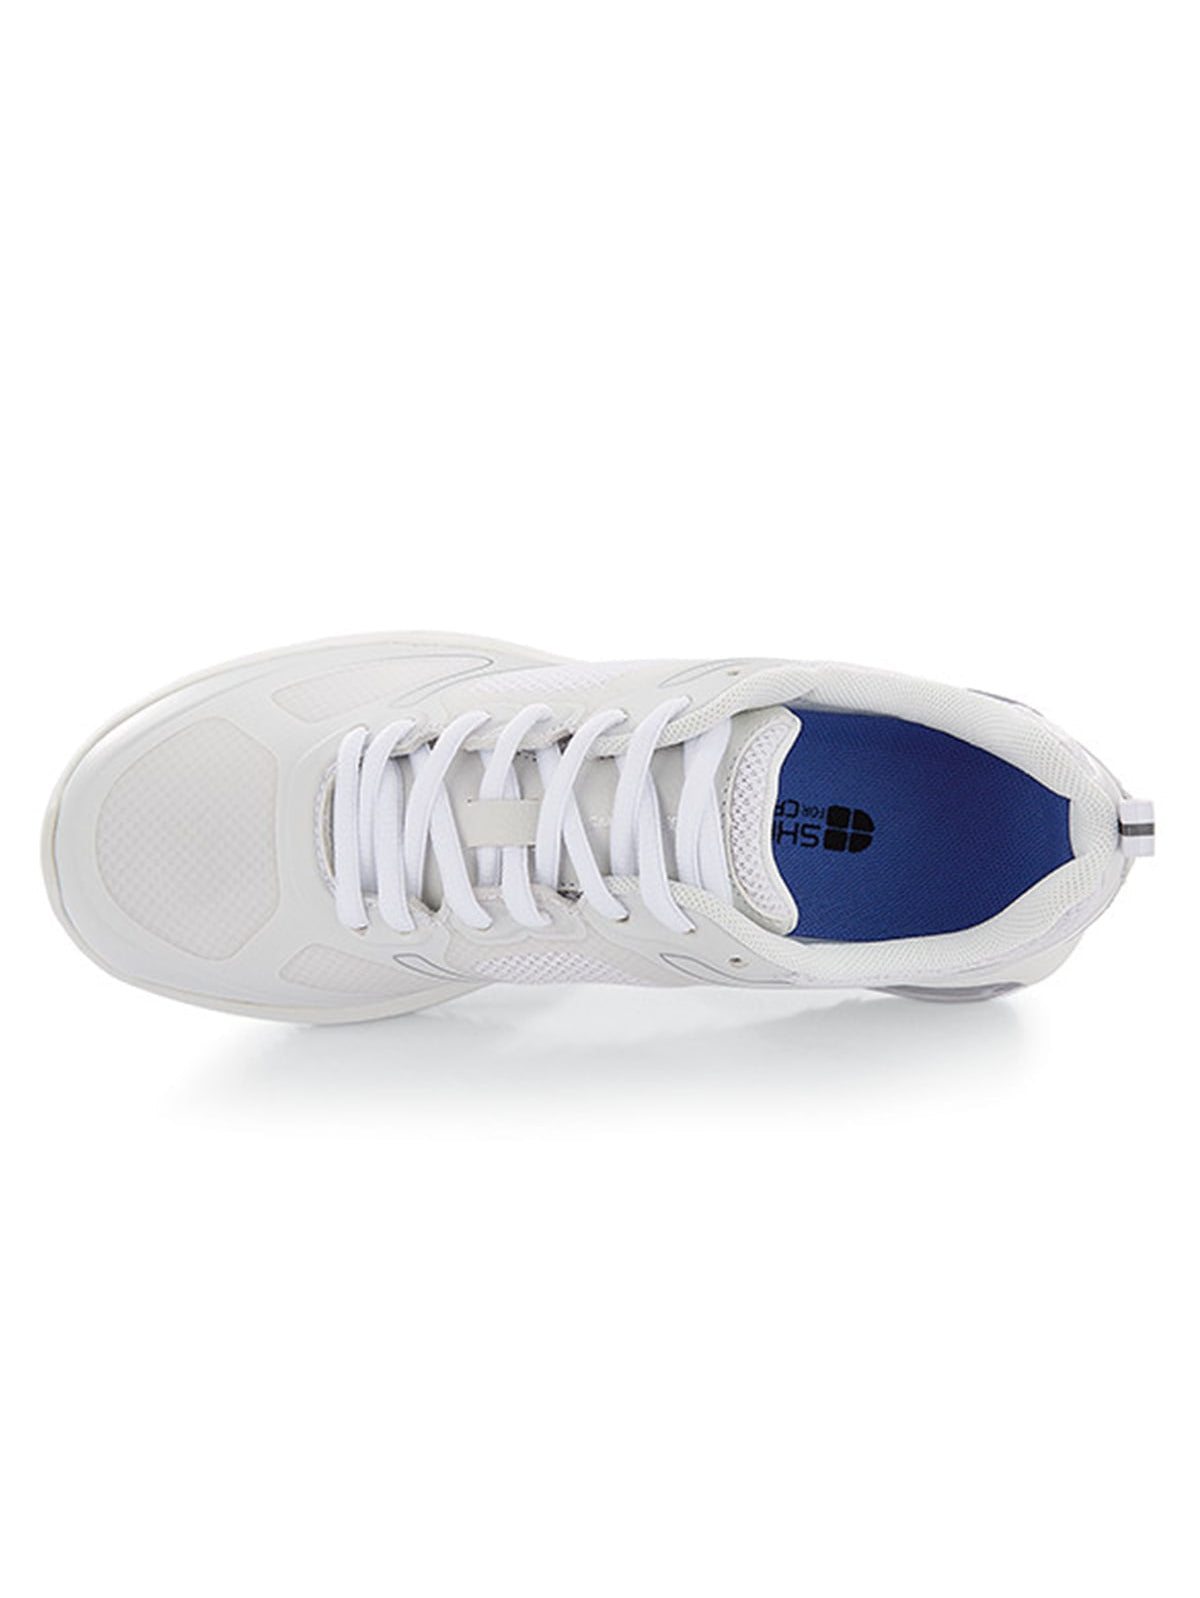 Women's Work Shoe Revolution 2 White by  Shoes For Crews.